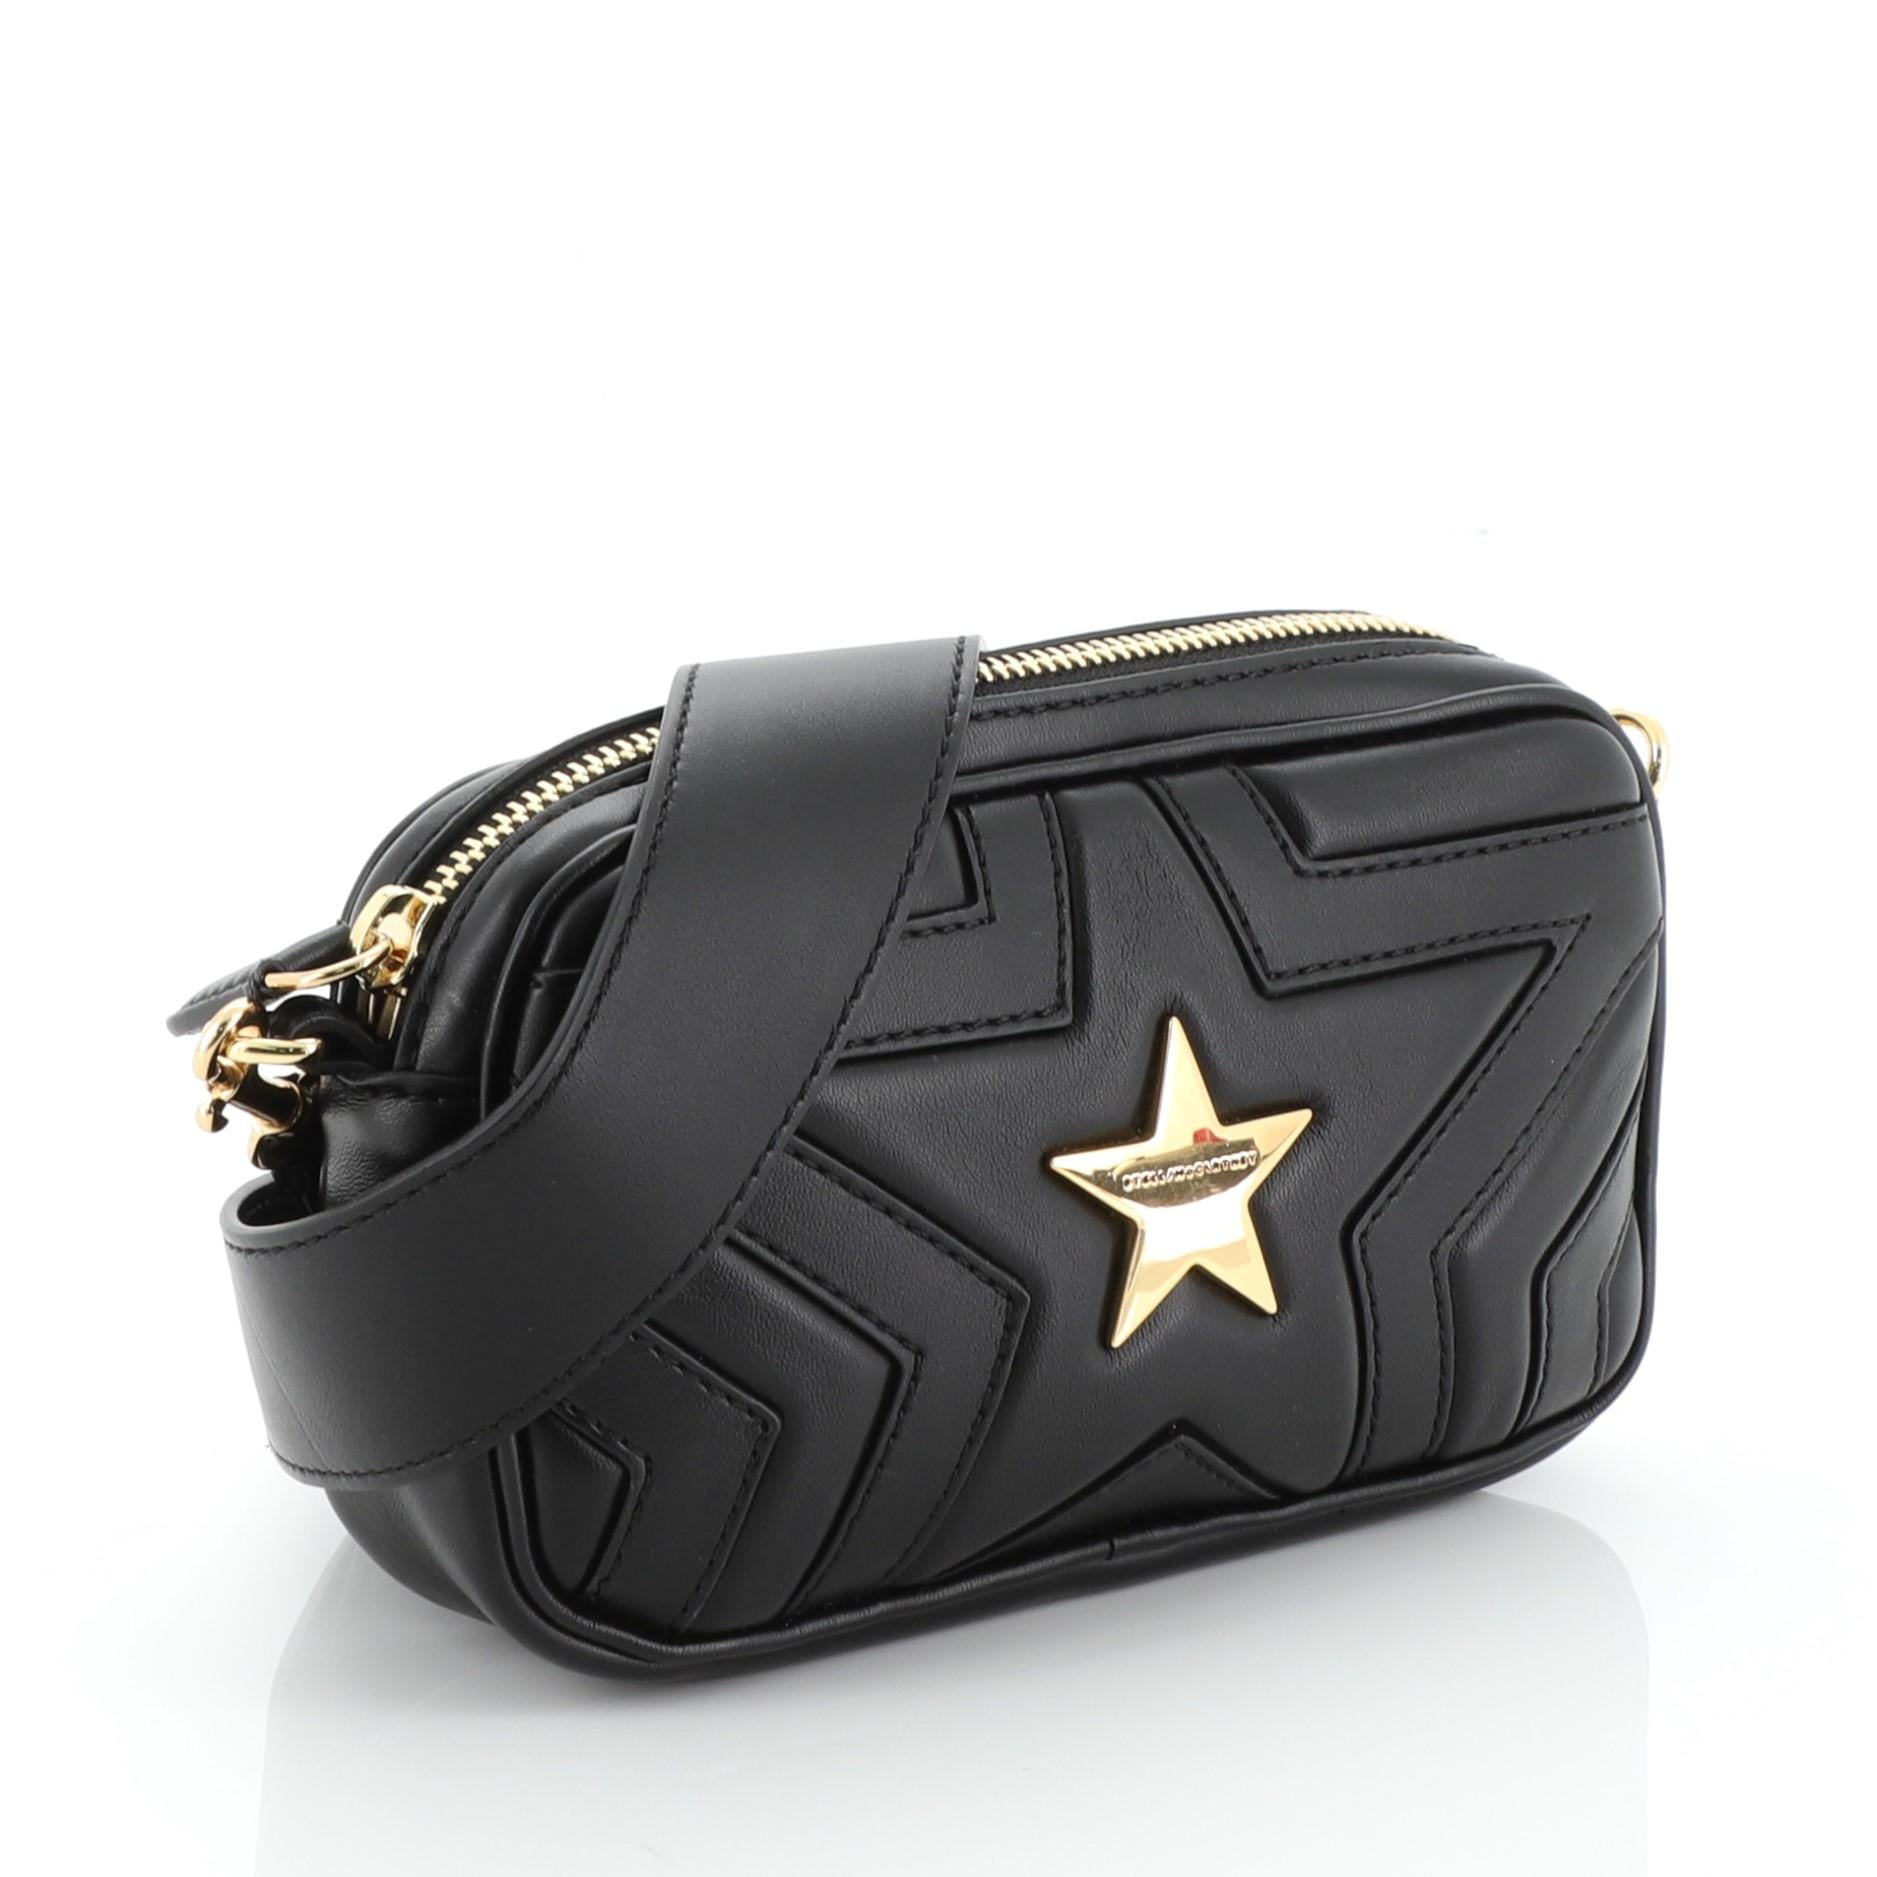 This Stella McCartney Stella Star Convertible Waist Bag Quilted Faux Leather, crafted from black quilted faux leather, features adjustable waist strap, laser cut quilted star design and gold-tone hardware. Its zip closure opens to a gray microfiber